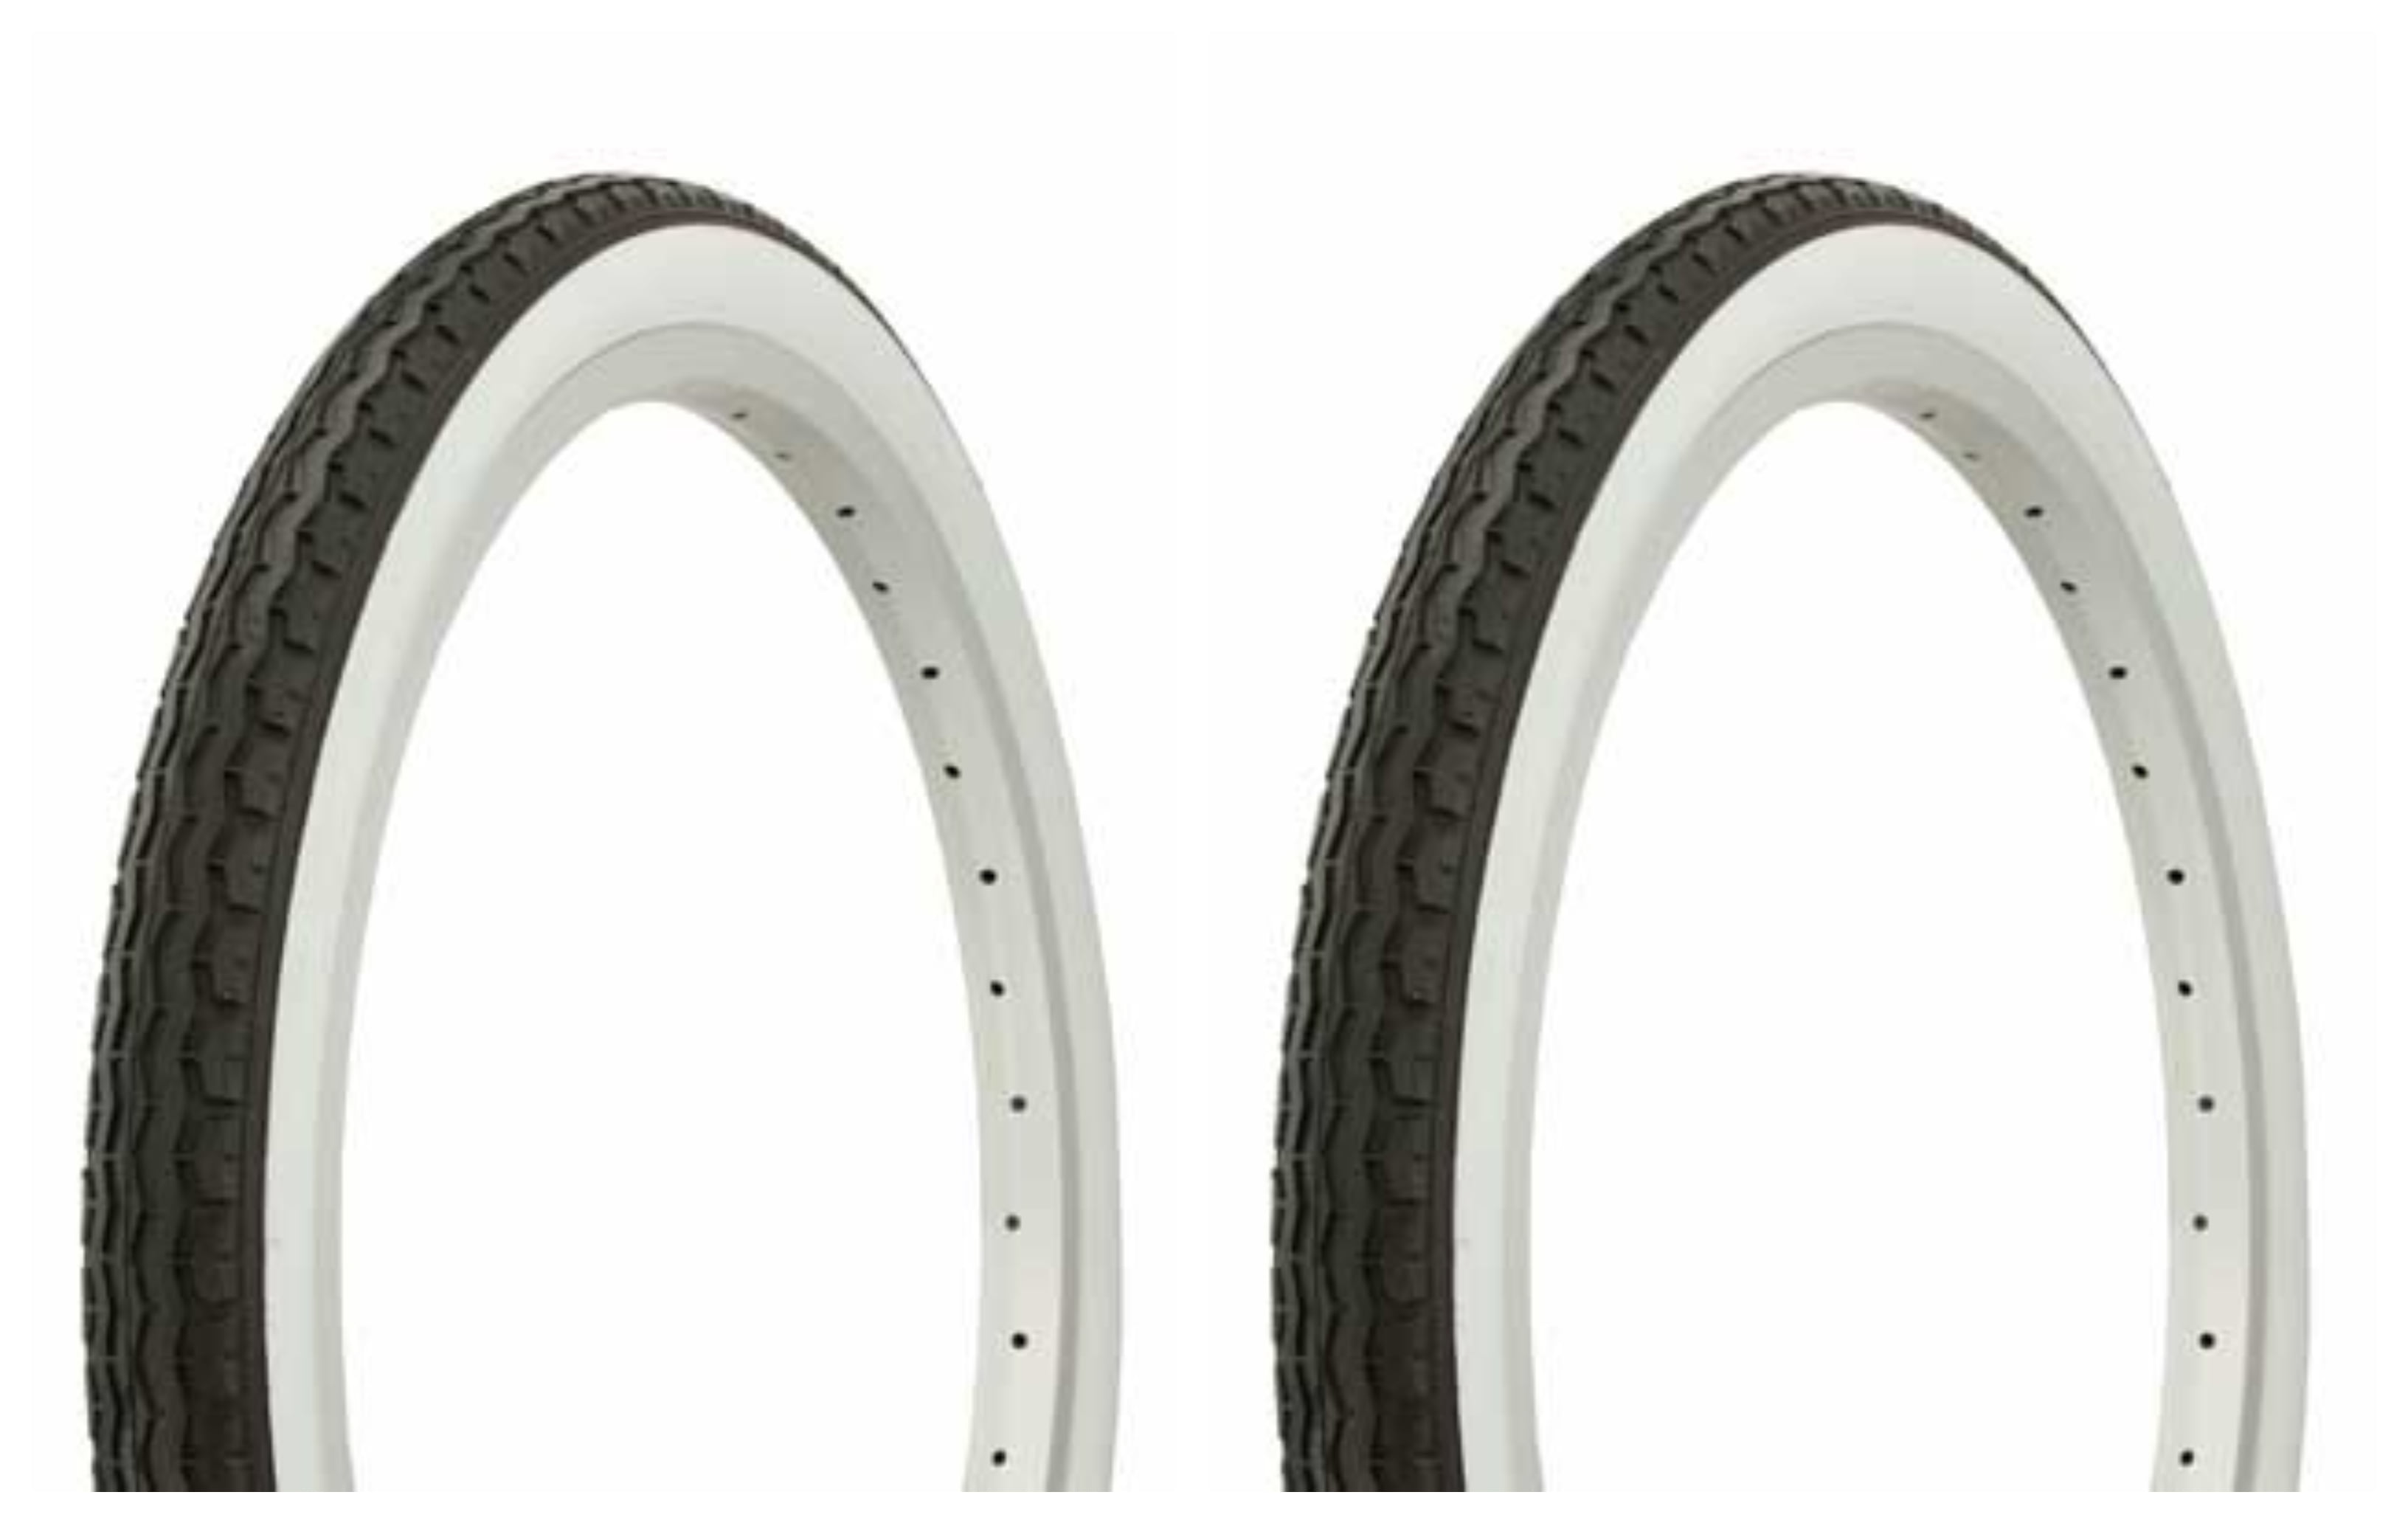 A PAIR OF 16" X 1.75 WHITEWALL LOWRIDER BICYCLE DURO TIRE 